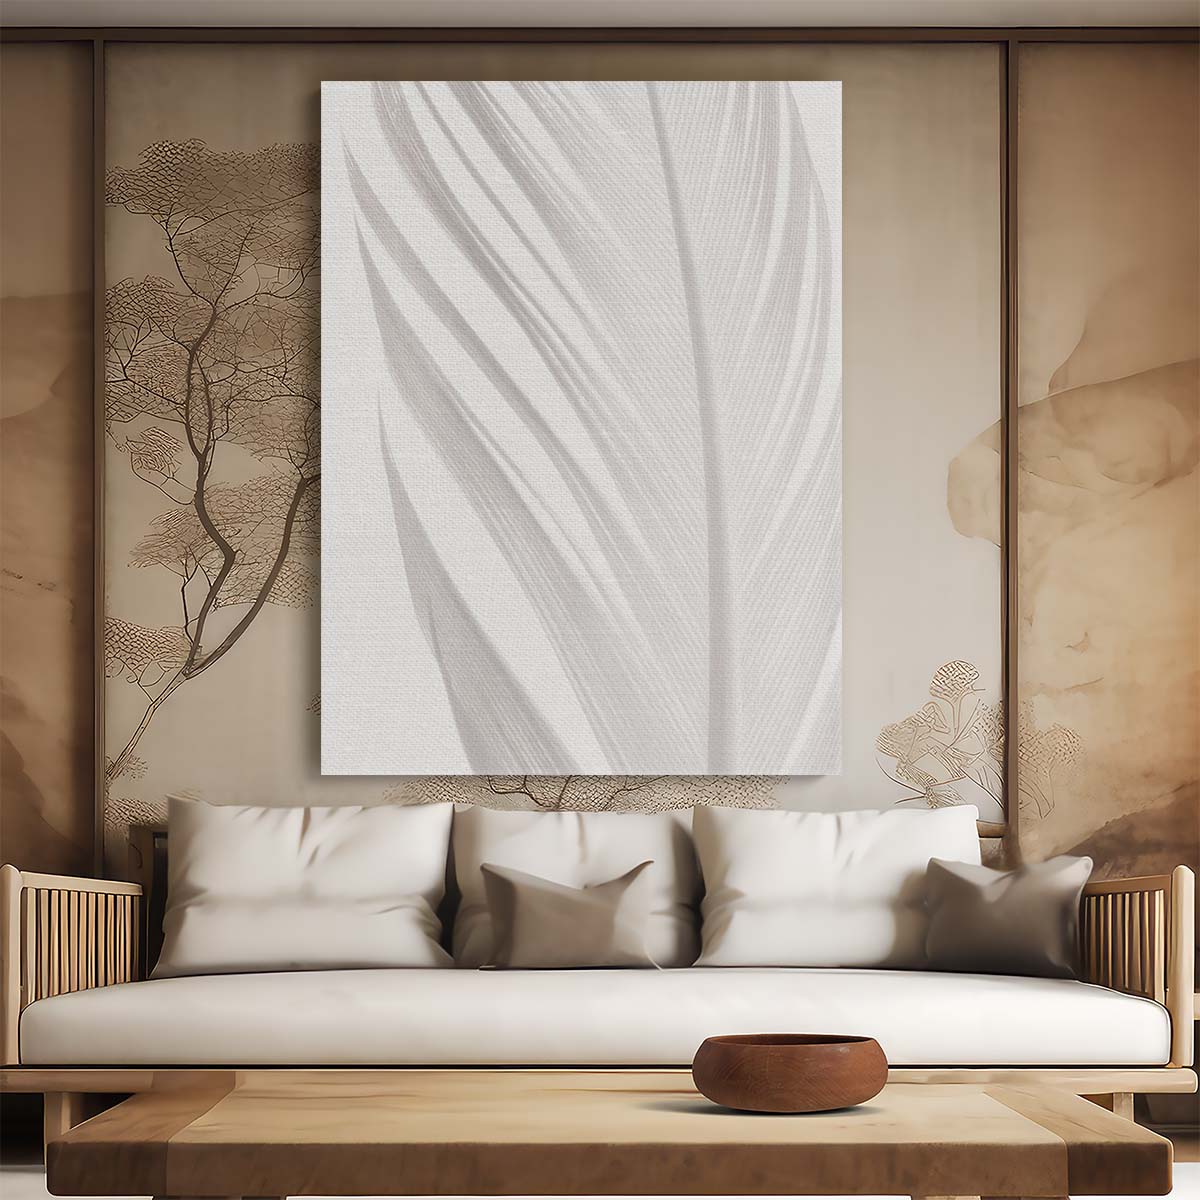 Monochrome Still Life Photography - Soft White Bird Feather Artwork by Luxuriance Designs, made in USA